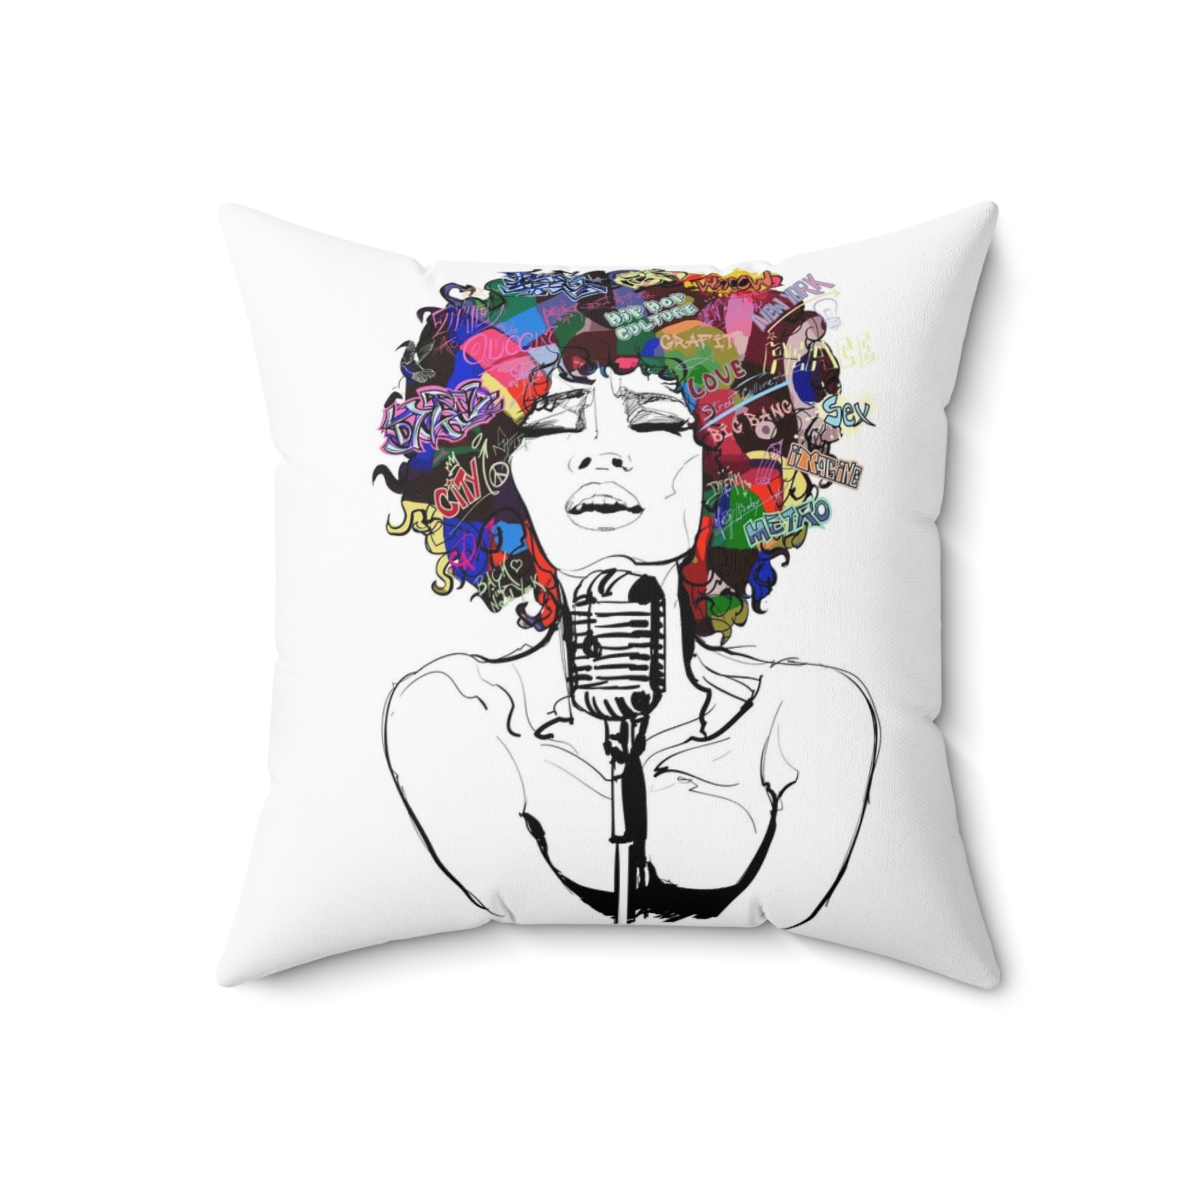 Square Pillows Woman with Thoughts product thumbnail image